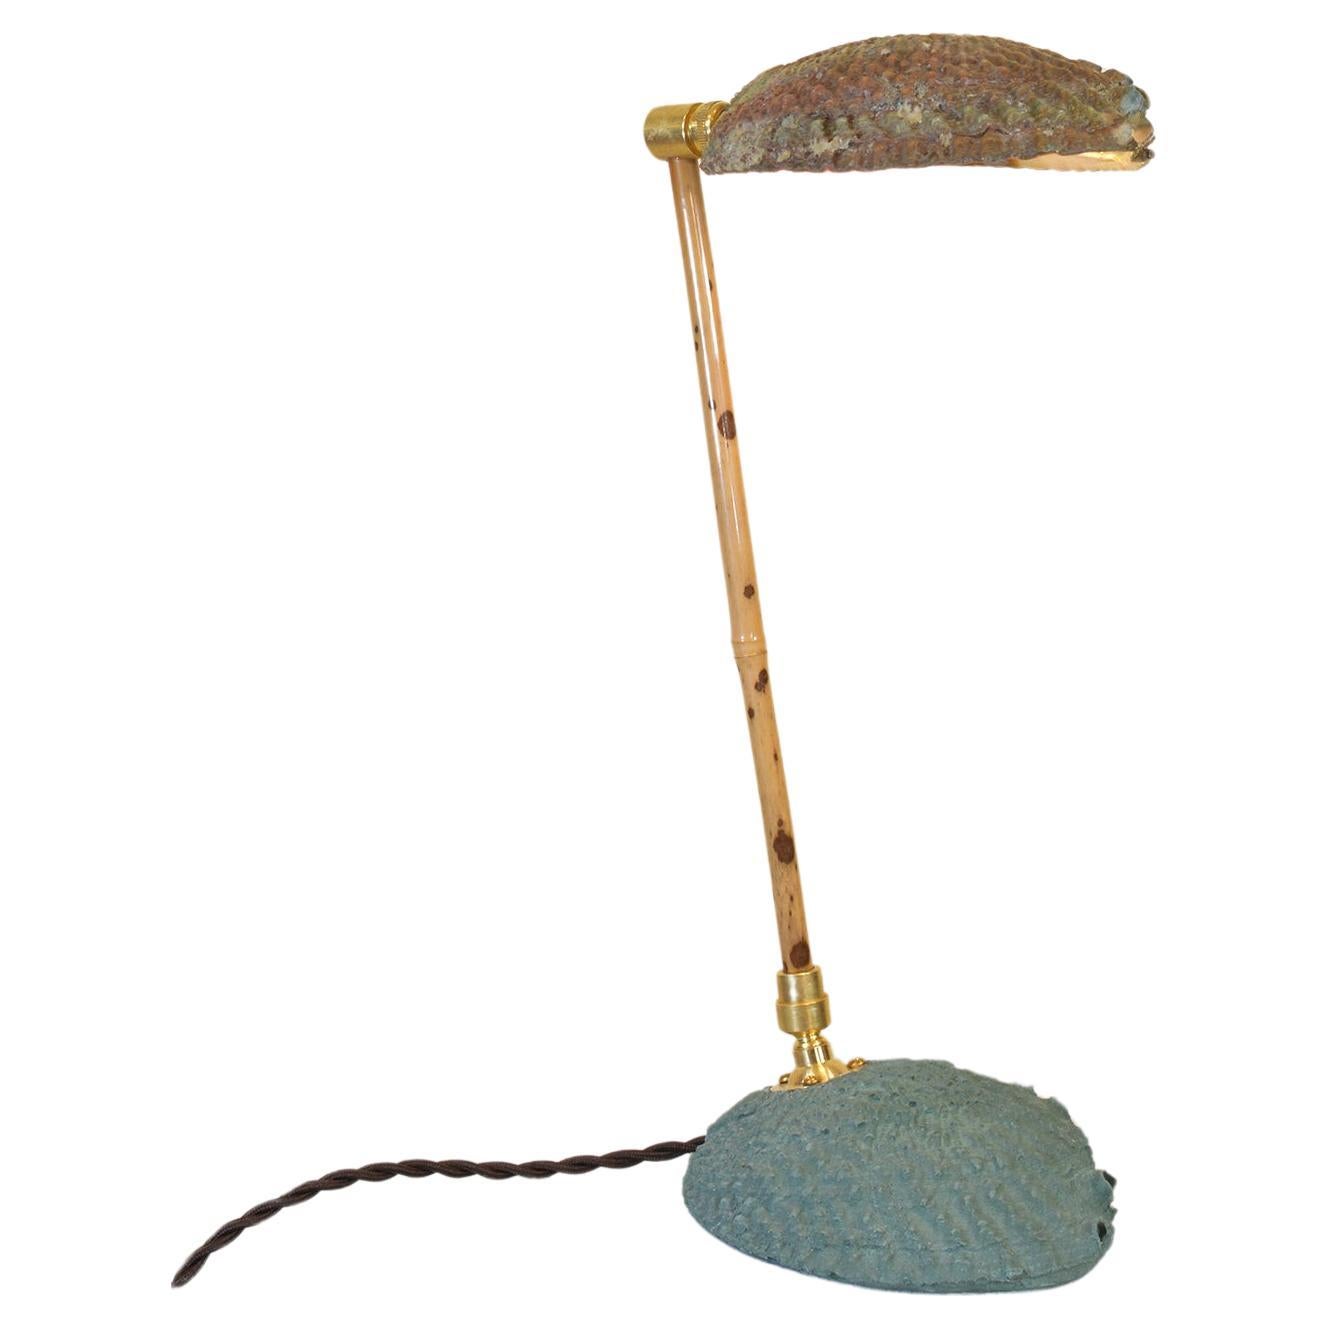 Articulated Bamboo Table Lamp with Plaster Abalone Base and Abalone Shell Shade